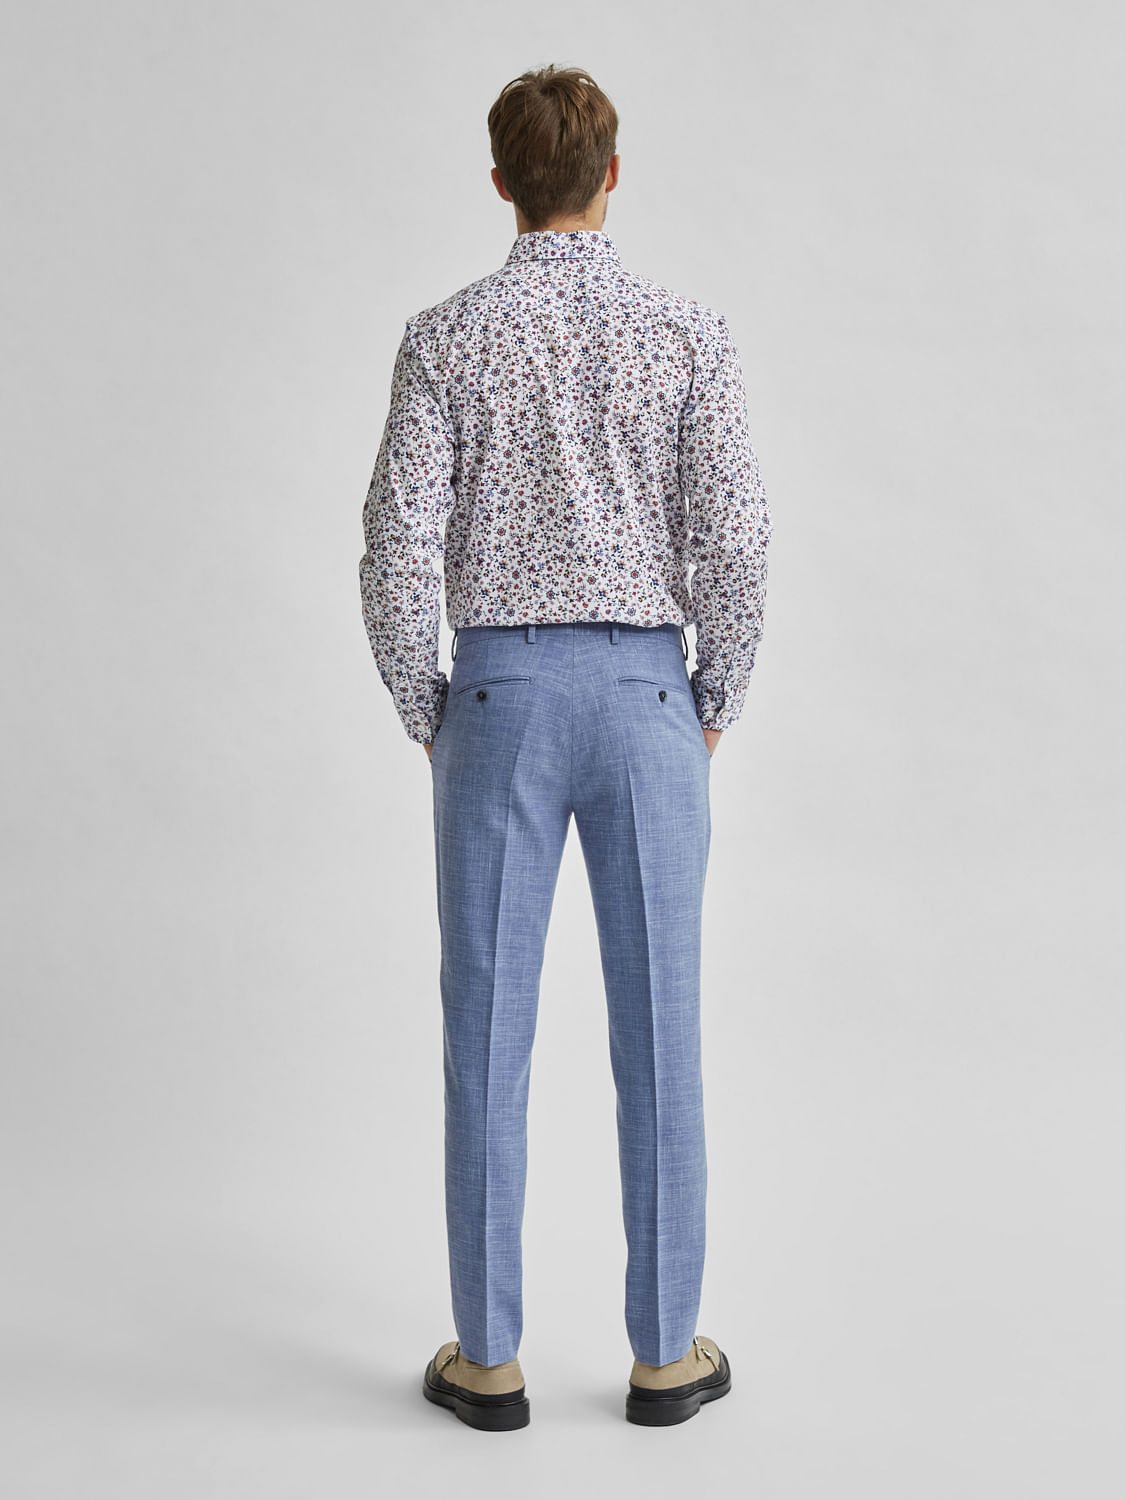 Cruna - New Town Trousers in Cotton - 520 - Light Blue - Handmade in Italy  - Luxury High Quality Pants - Avvenice